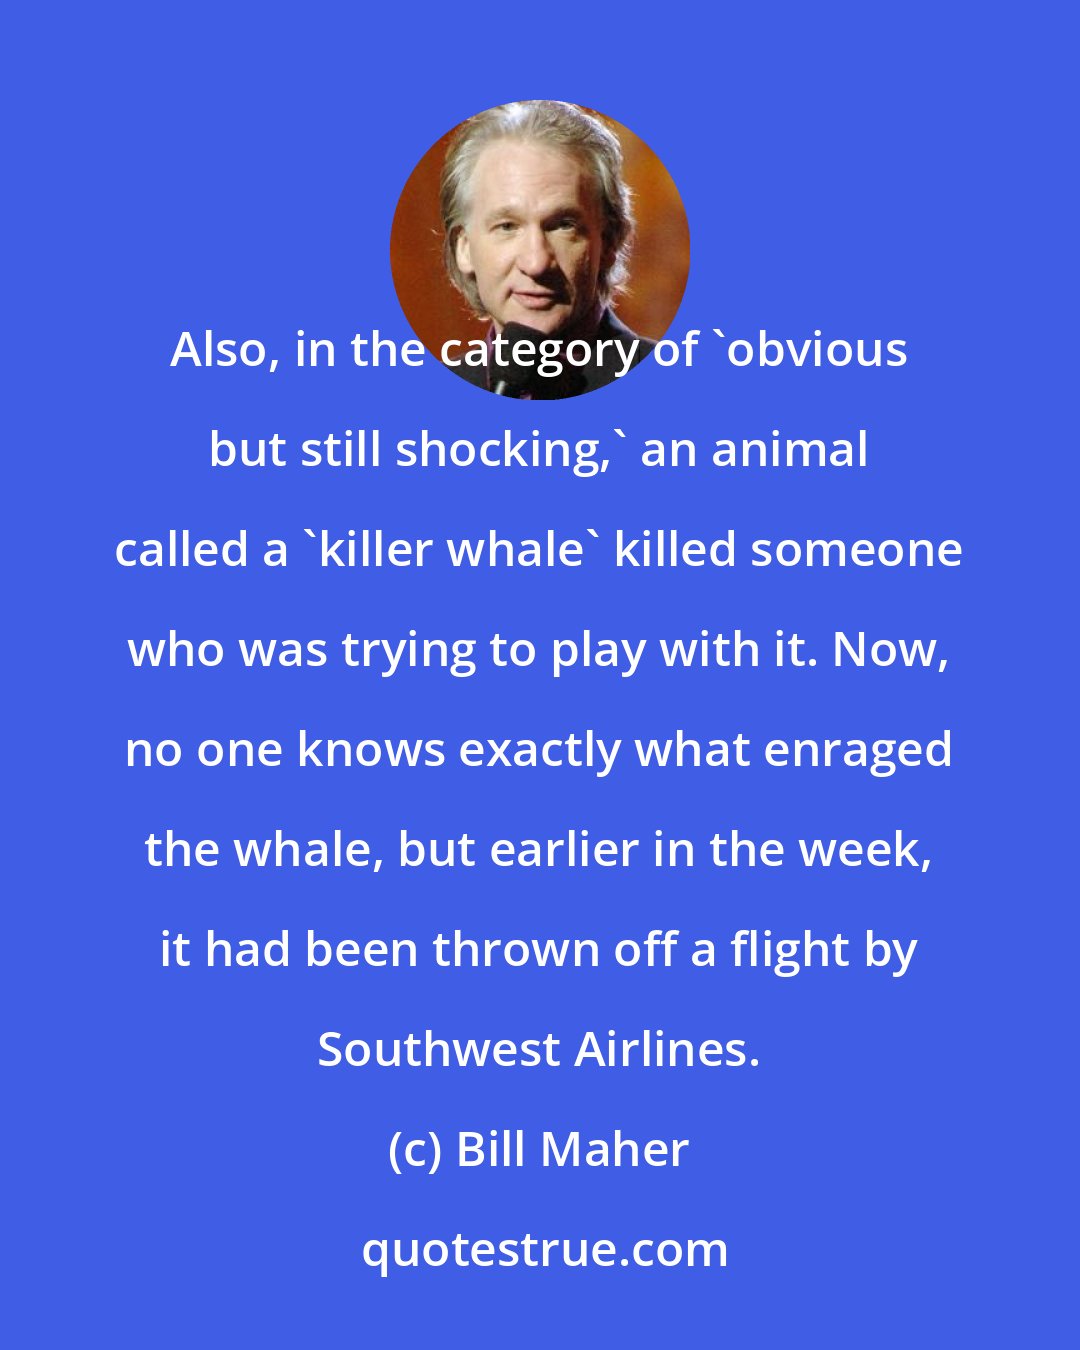 Bill Maher: Also, in the category of 'obvious but still shocking,' an animal called a 'killer whale' killed someone who was trying to play with it. Now, no one knows exactly what enraged the whale, but earlier in the week, it had been thrown off a flight by Southwest Airlines.